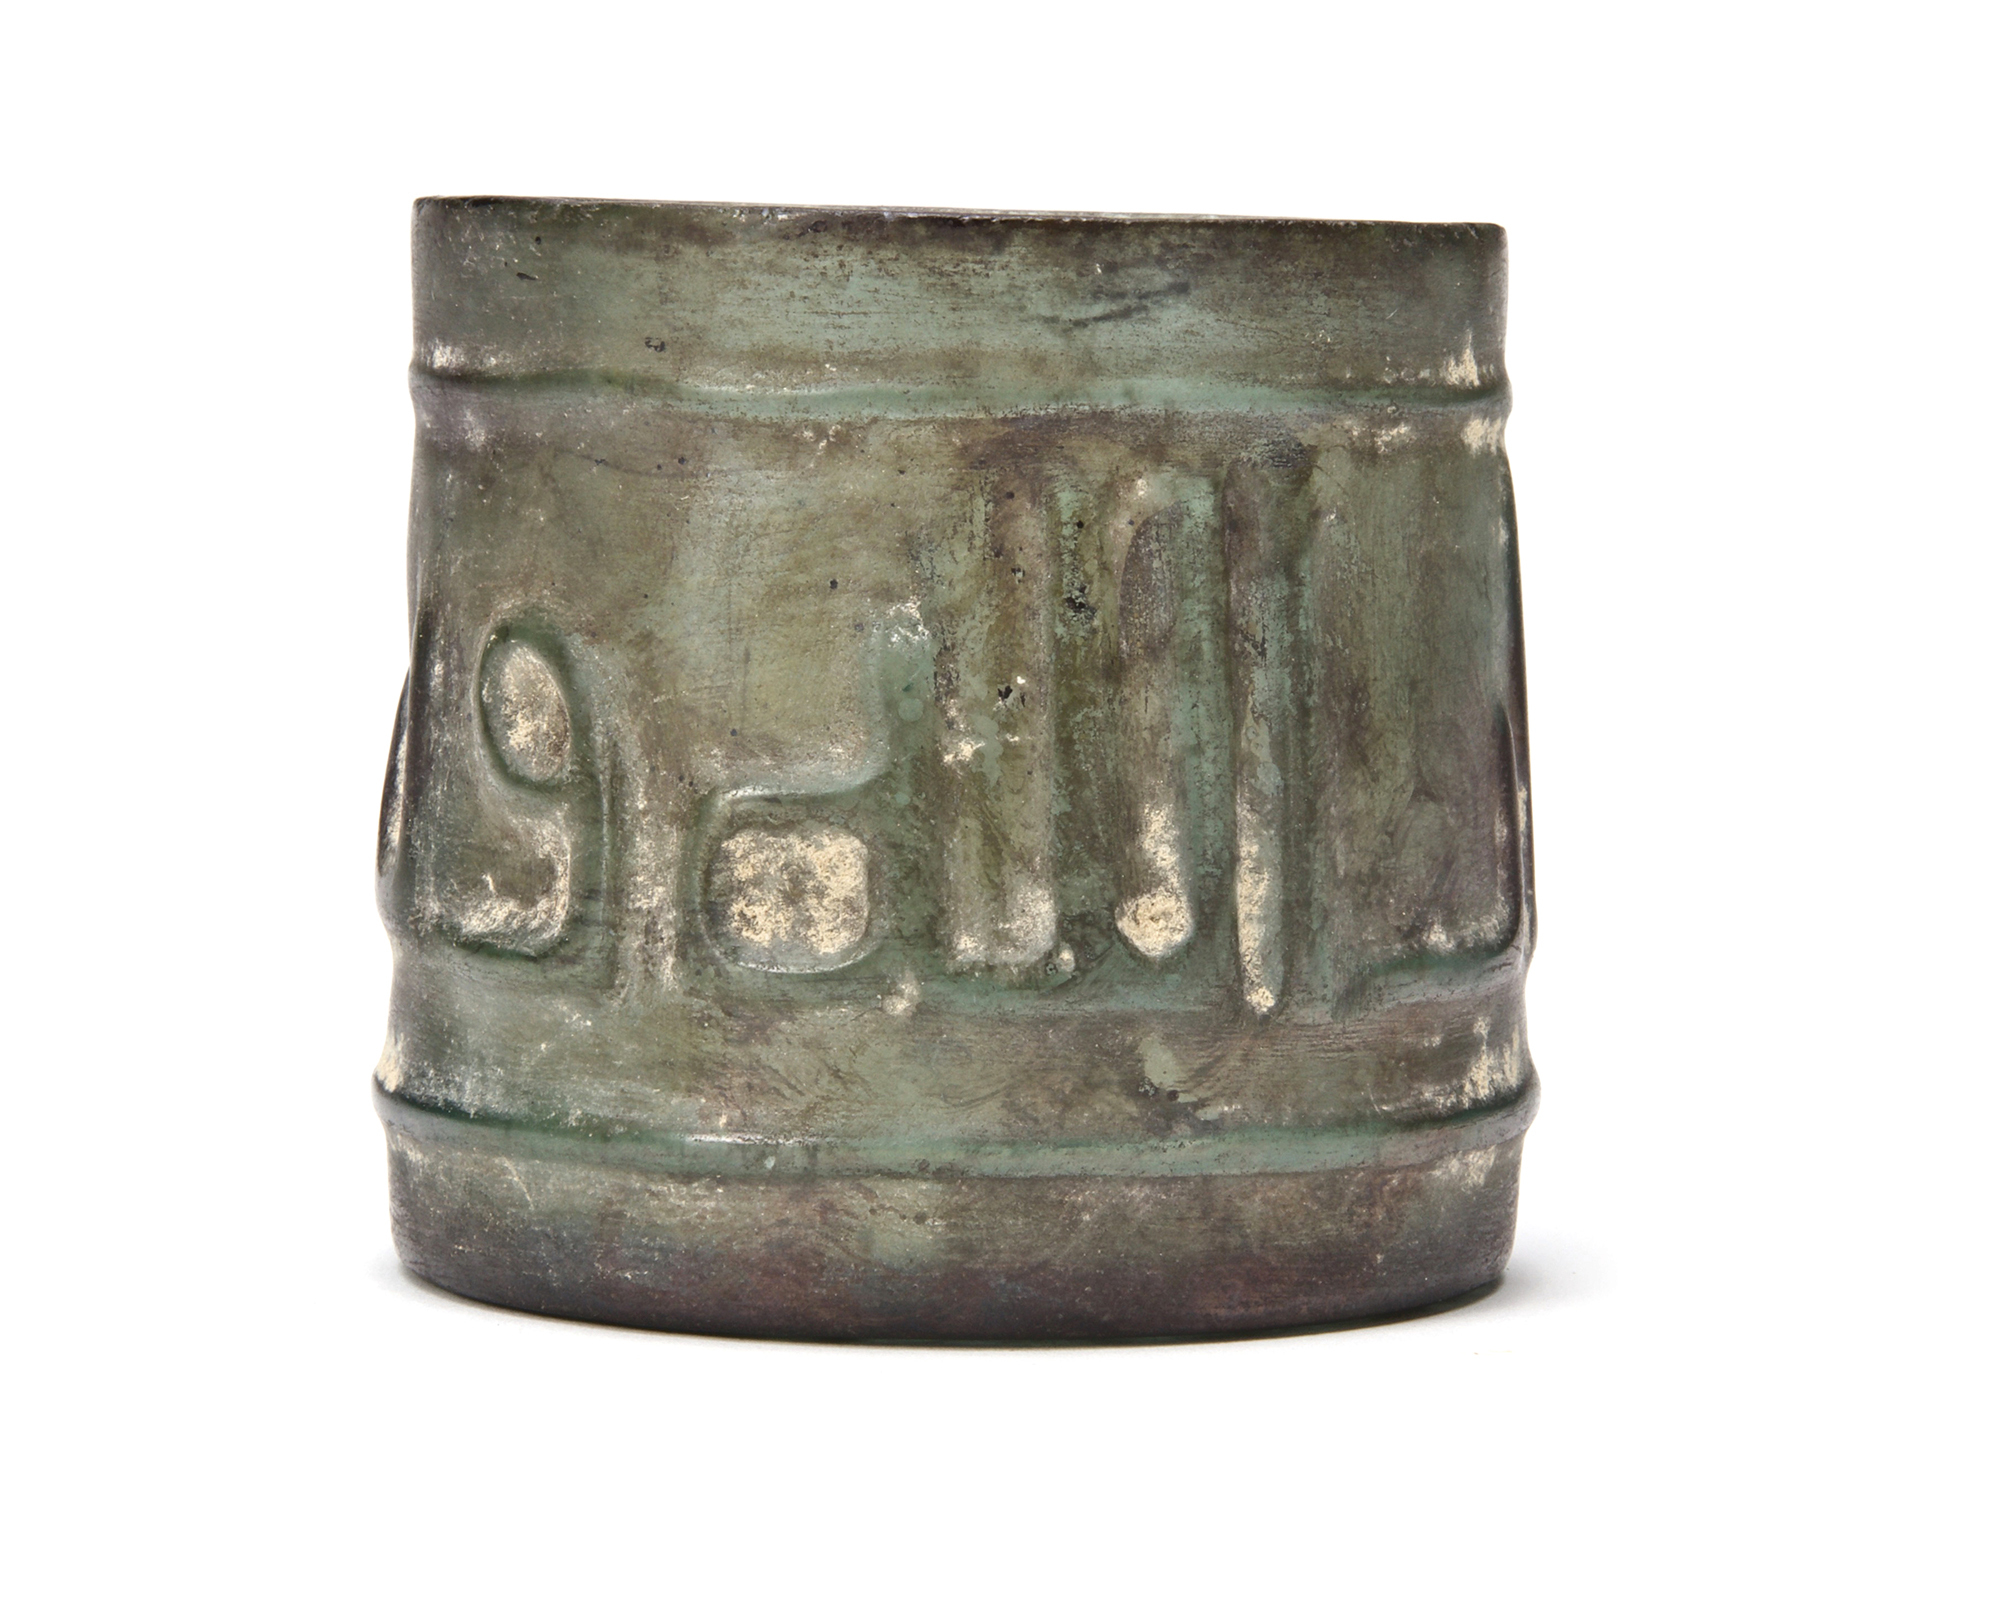 A GLASS BEAKER, SYRIA, 10TH-11TH CENTURY - Image 3 of 14